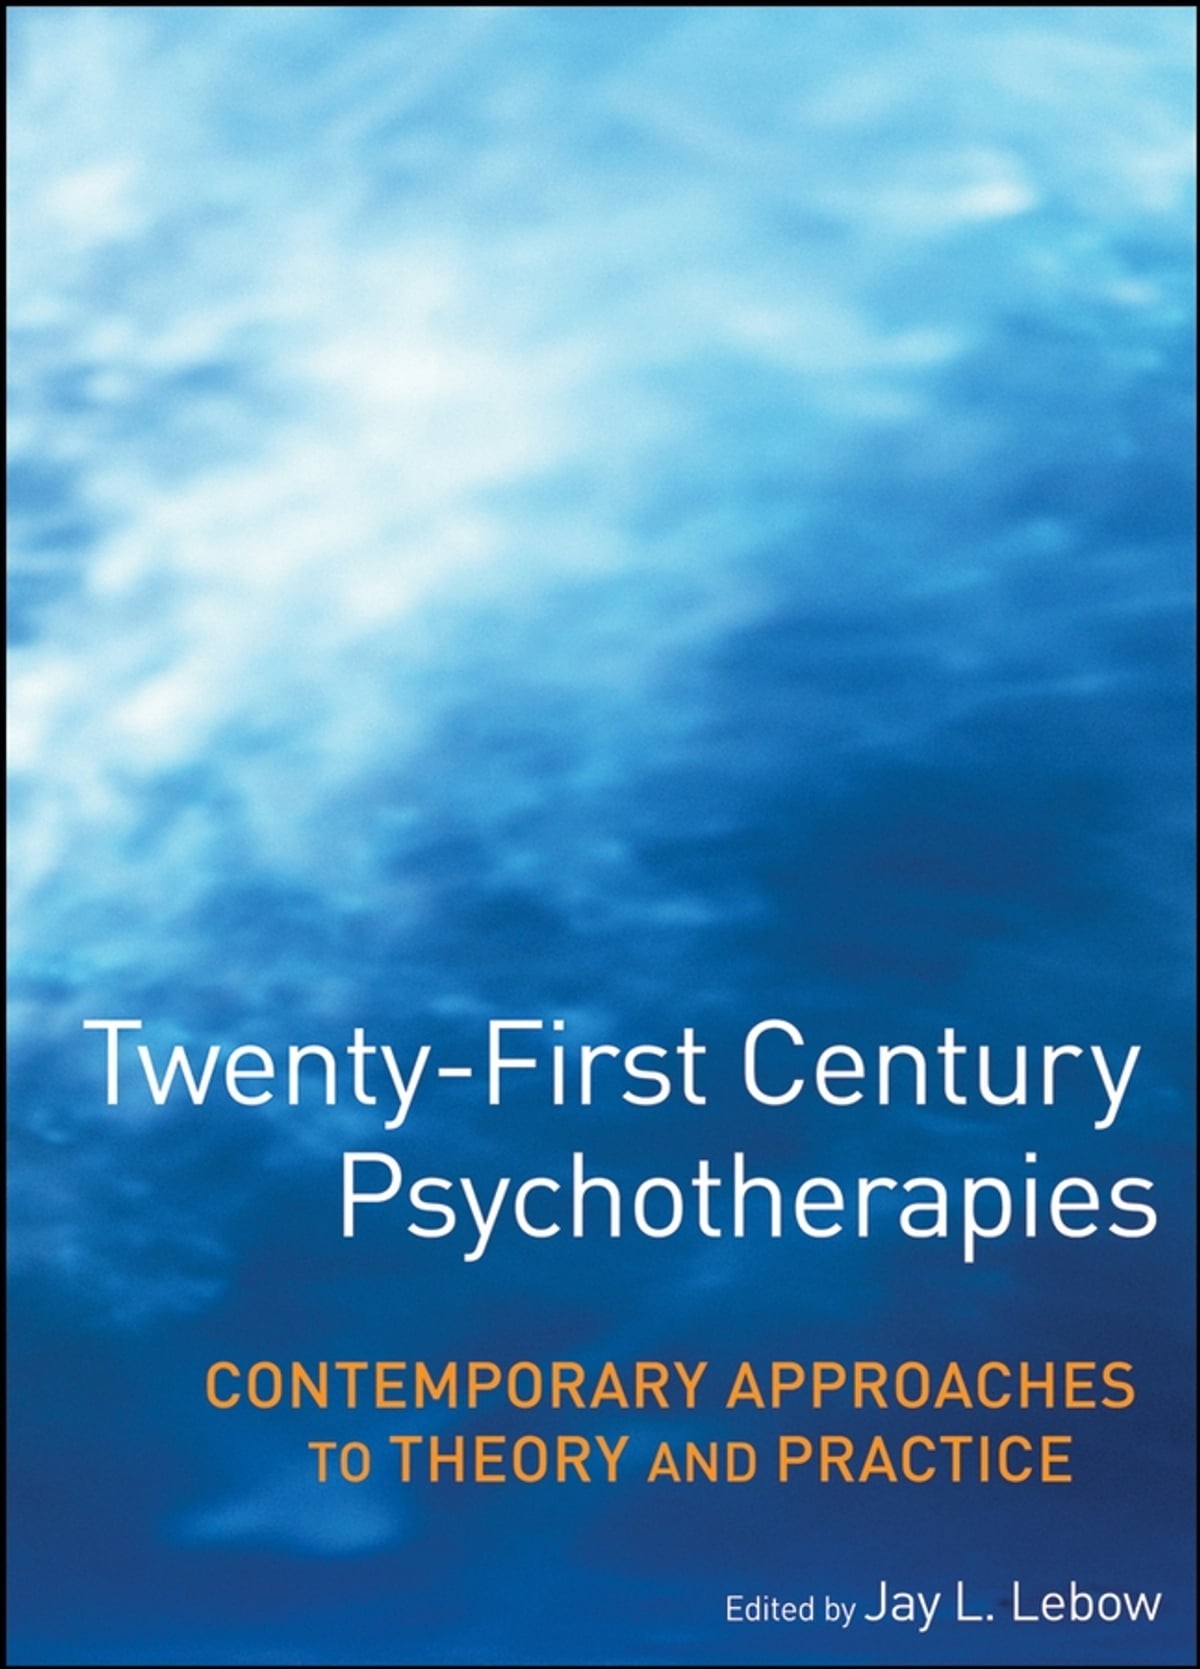 Twenty-First Century Psychotherapies: Contemporary Approaches to Theory and Practice